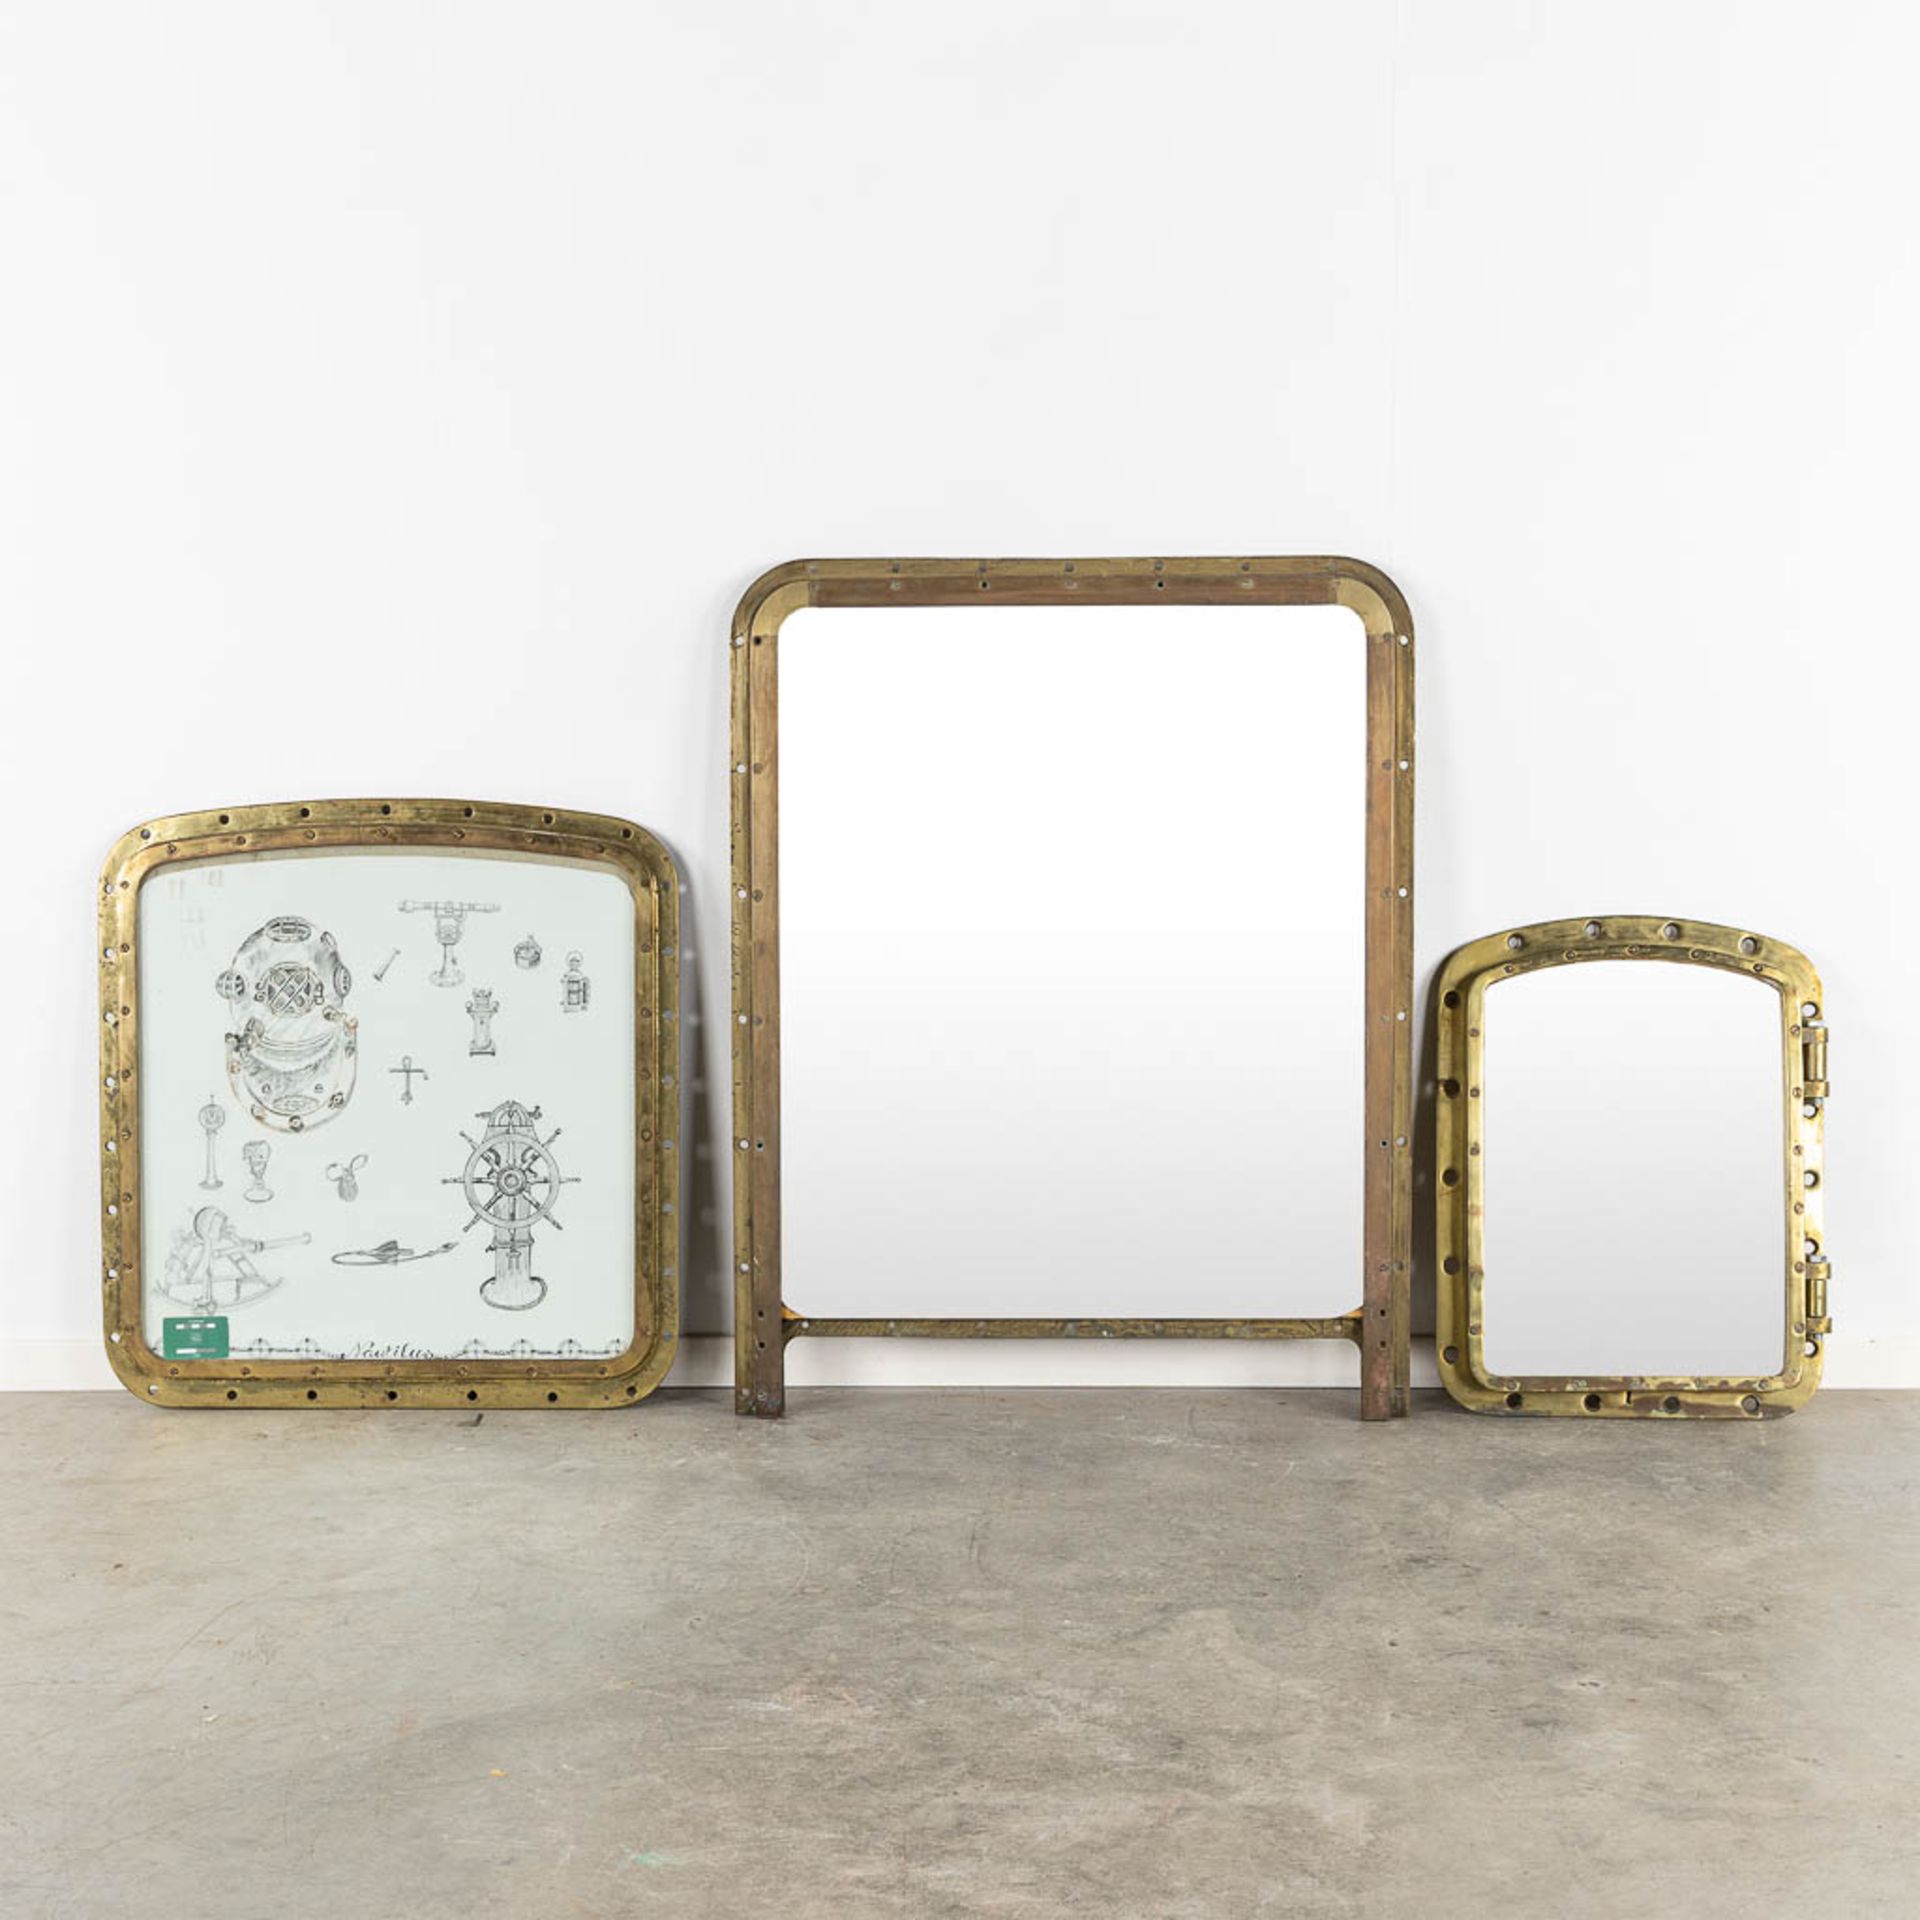 Three various Portholes, bronze and glass. Two changed into a mirror. (W:86 x H:110 cm) - Bild 2 aus 7